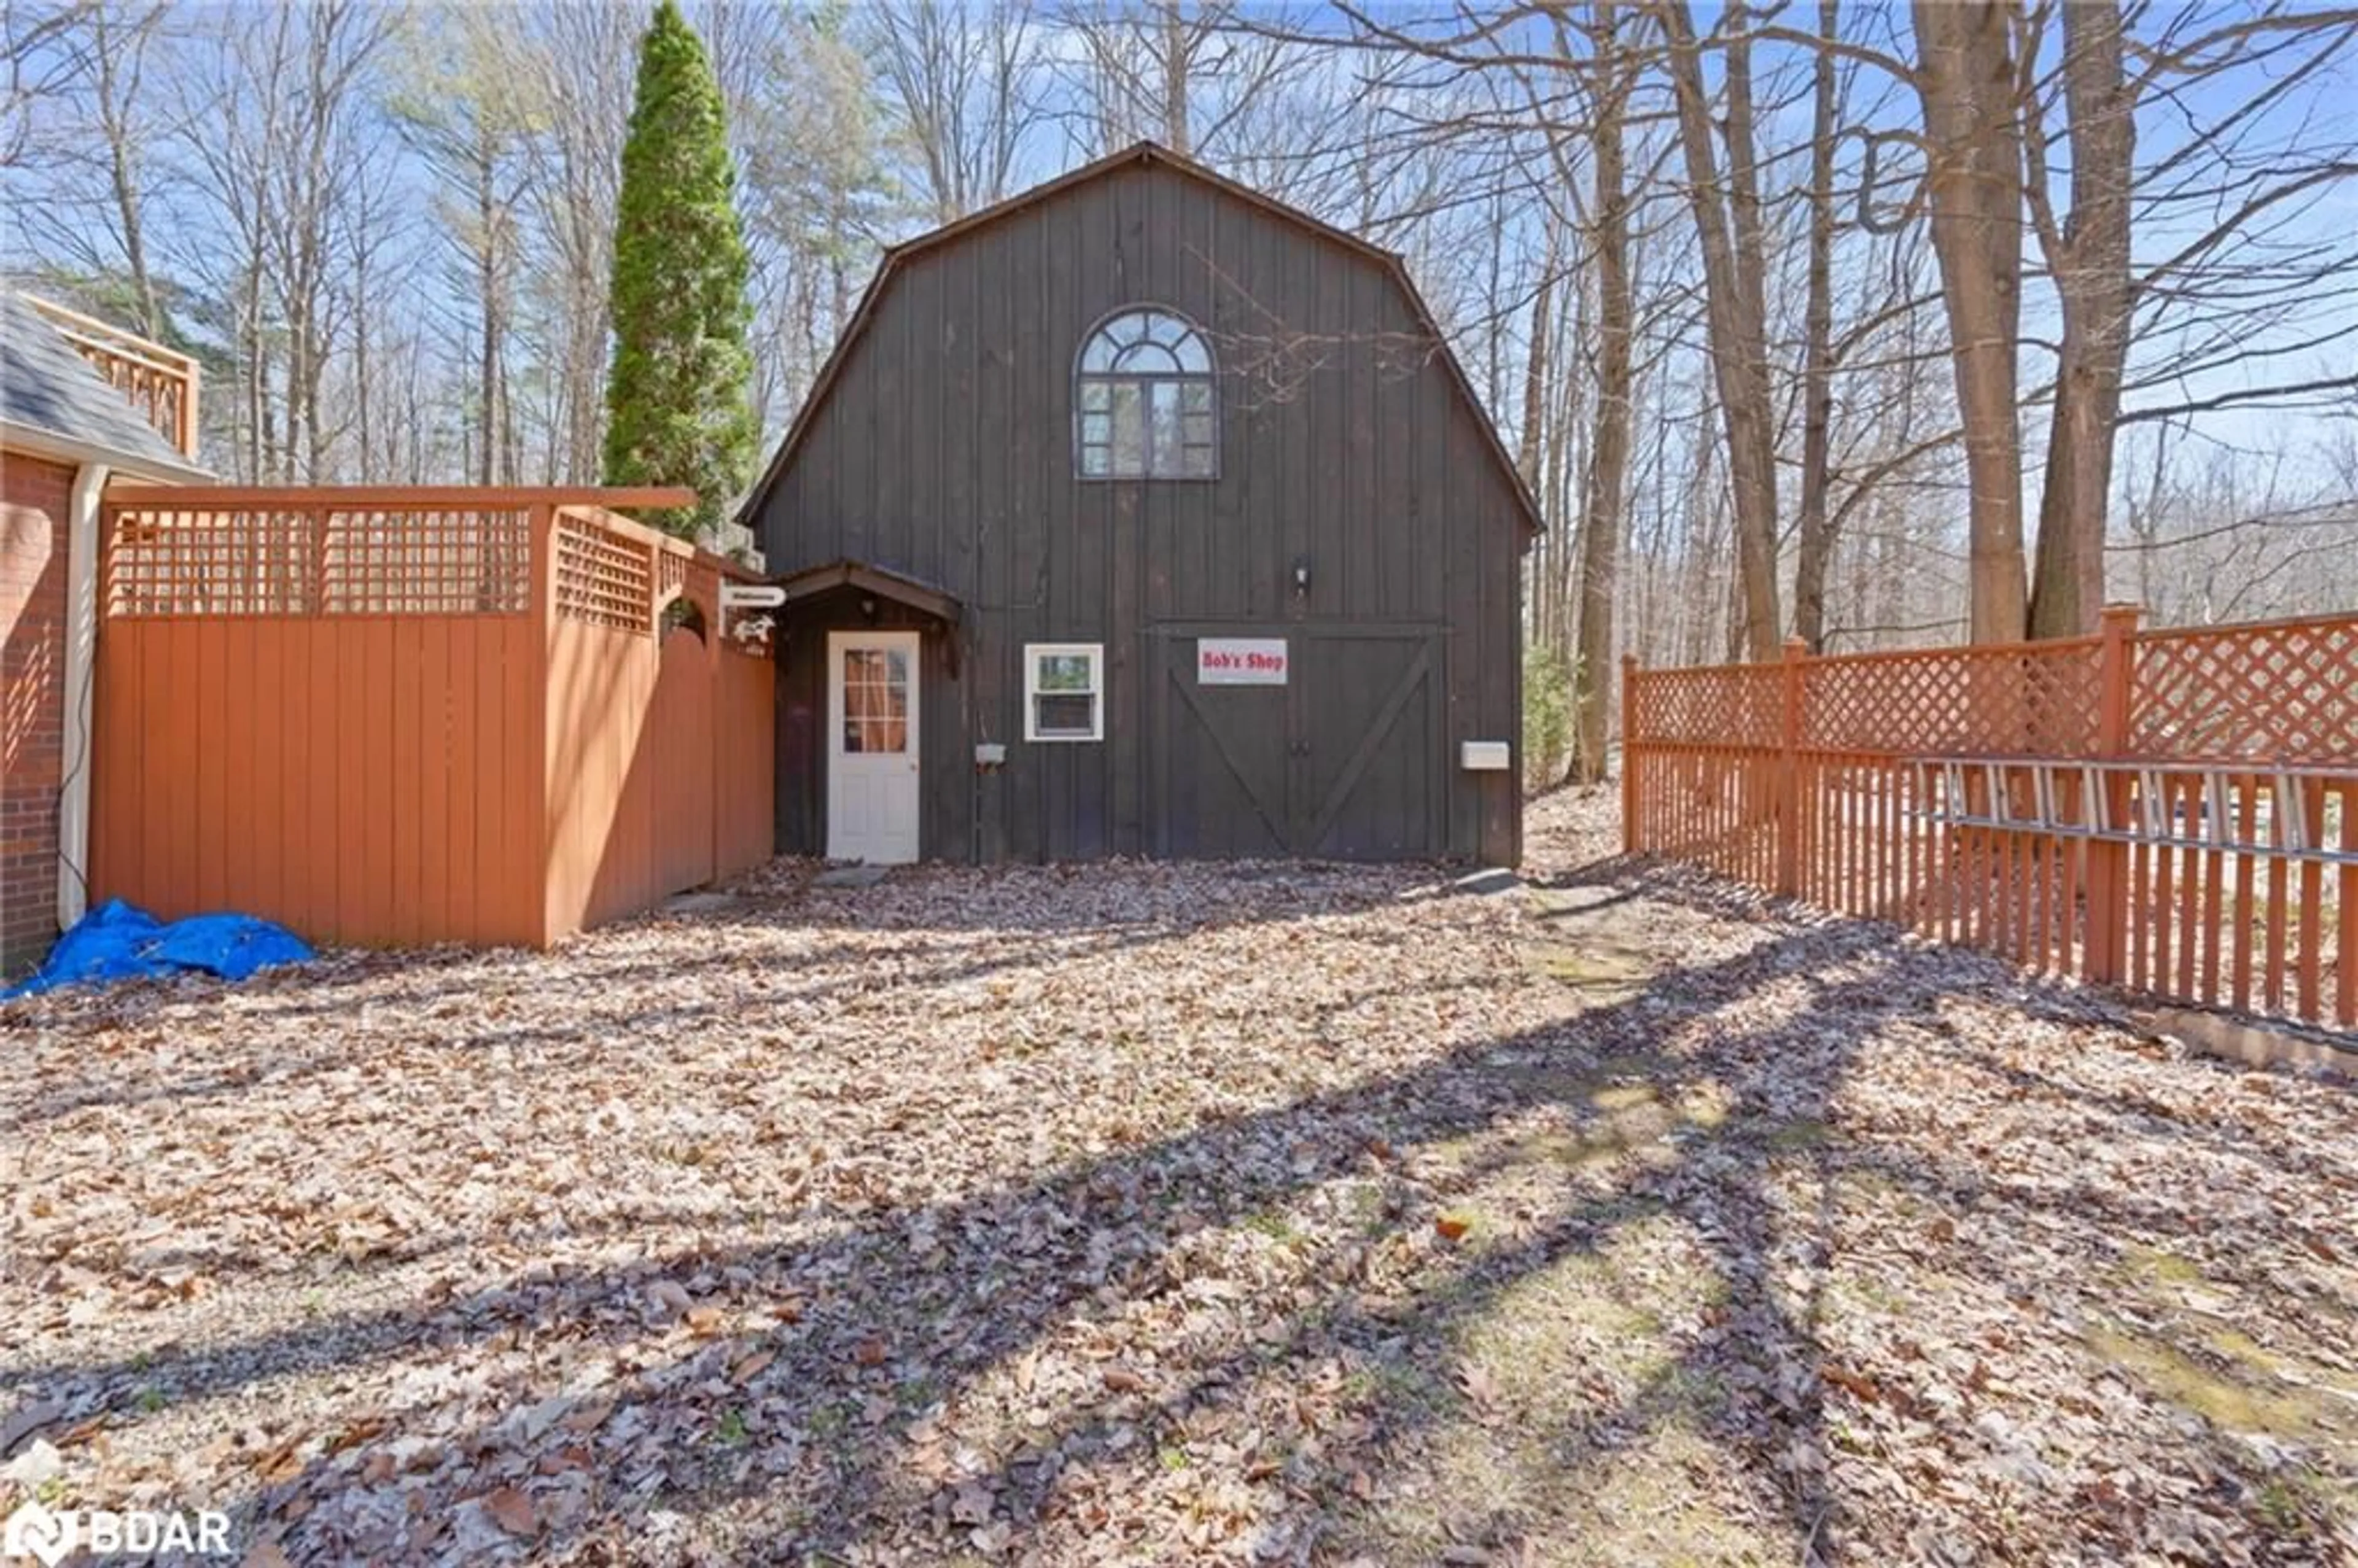 Shed for 1311 Snow Valley Rd, Midhurst Ontario L9X 1K2